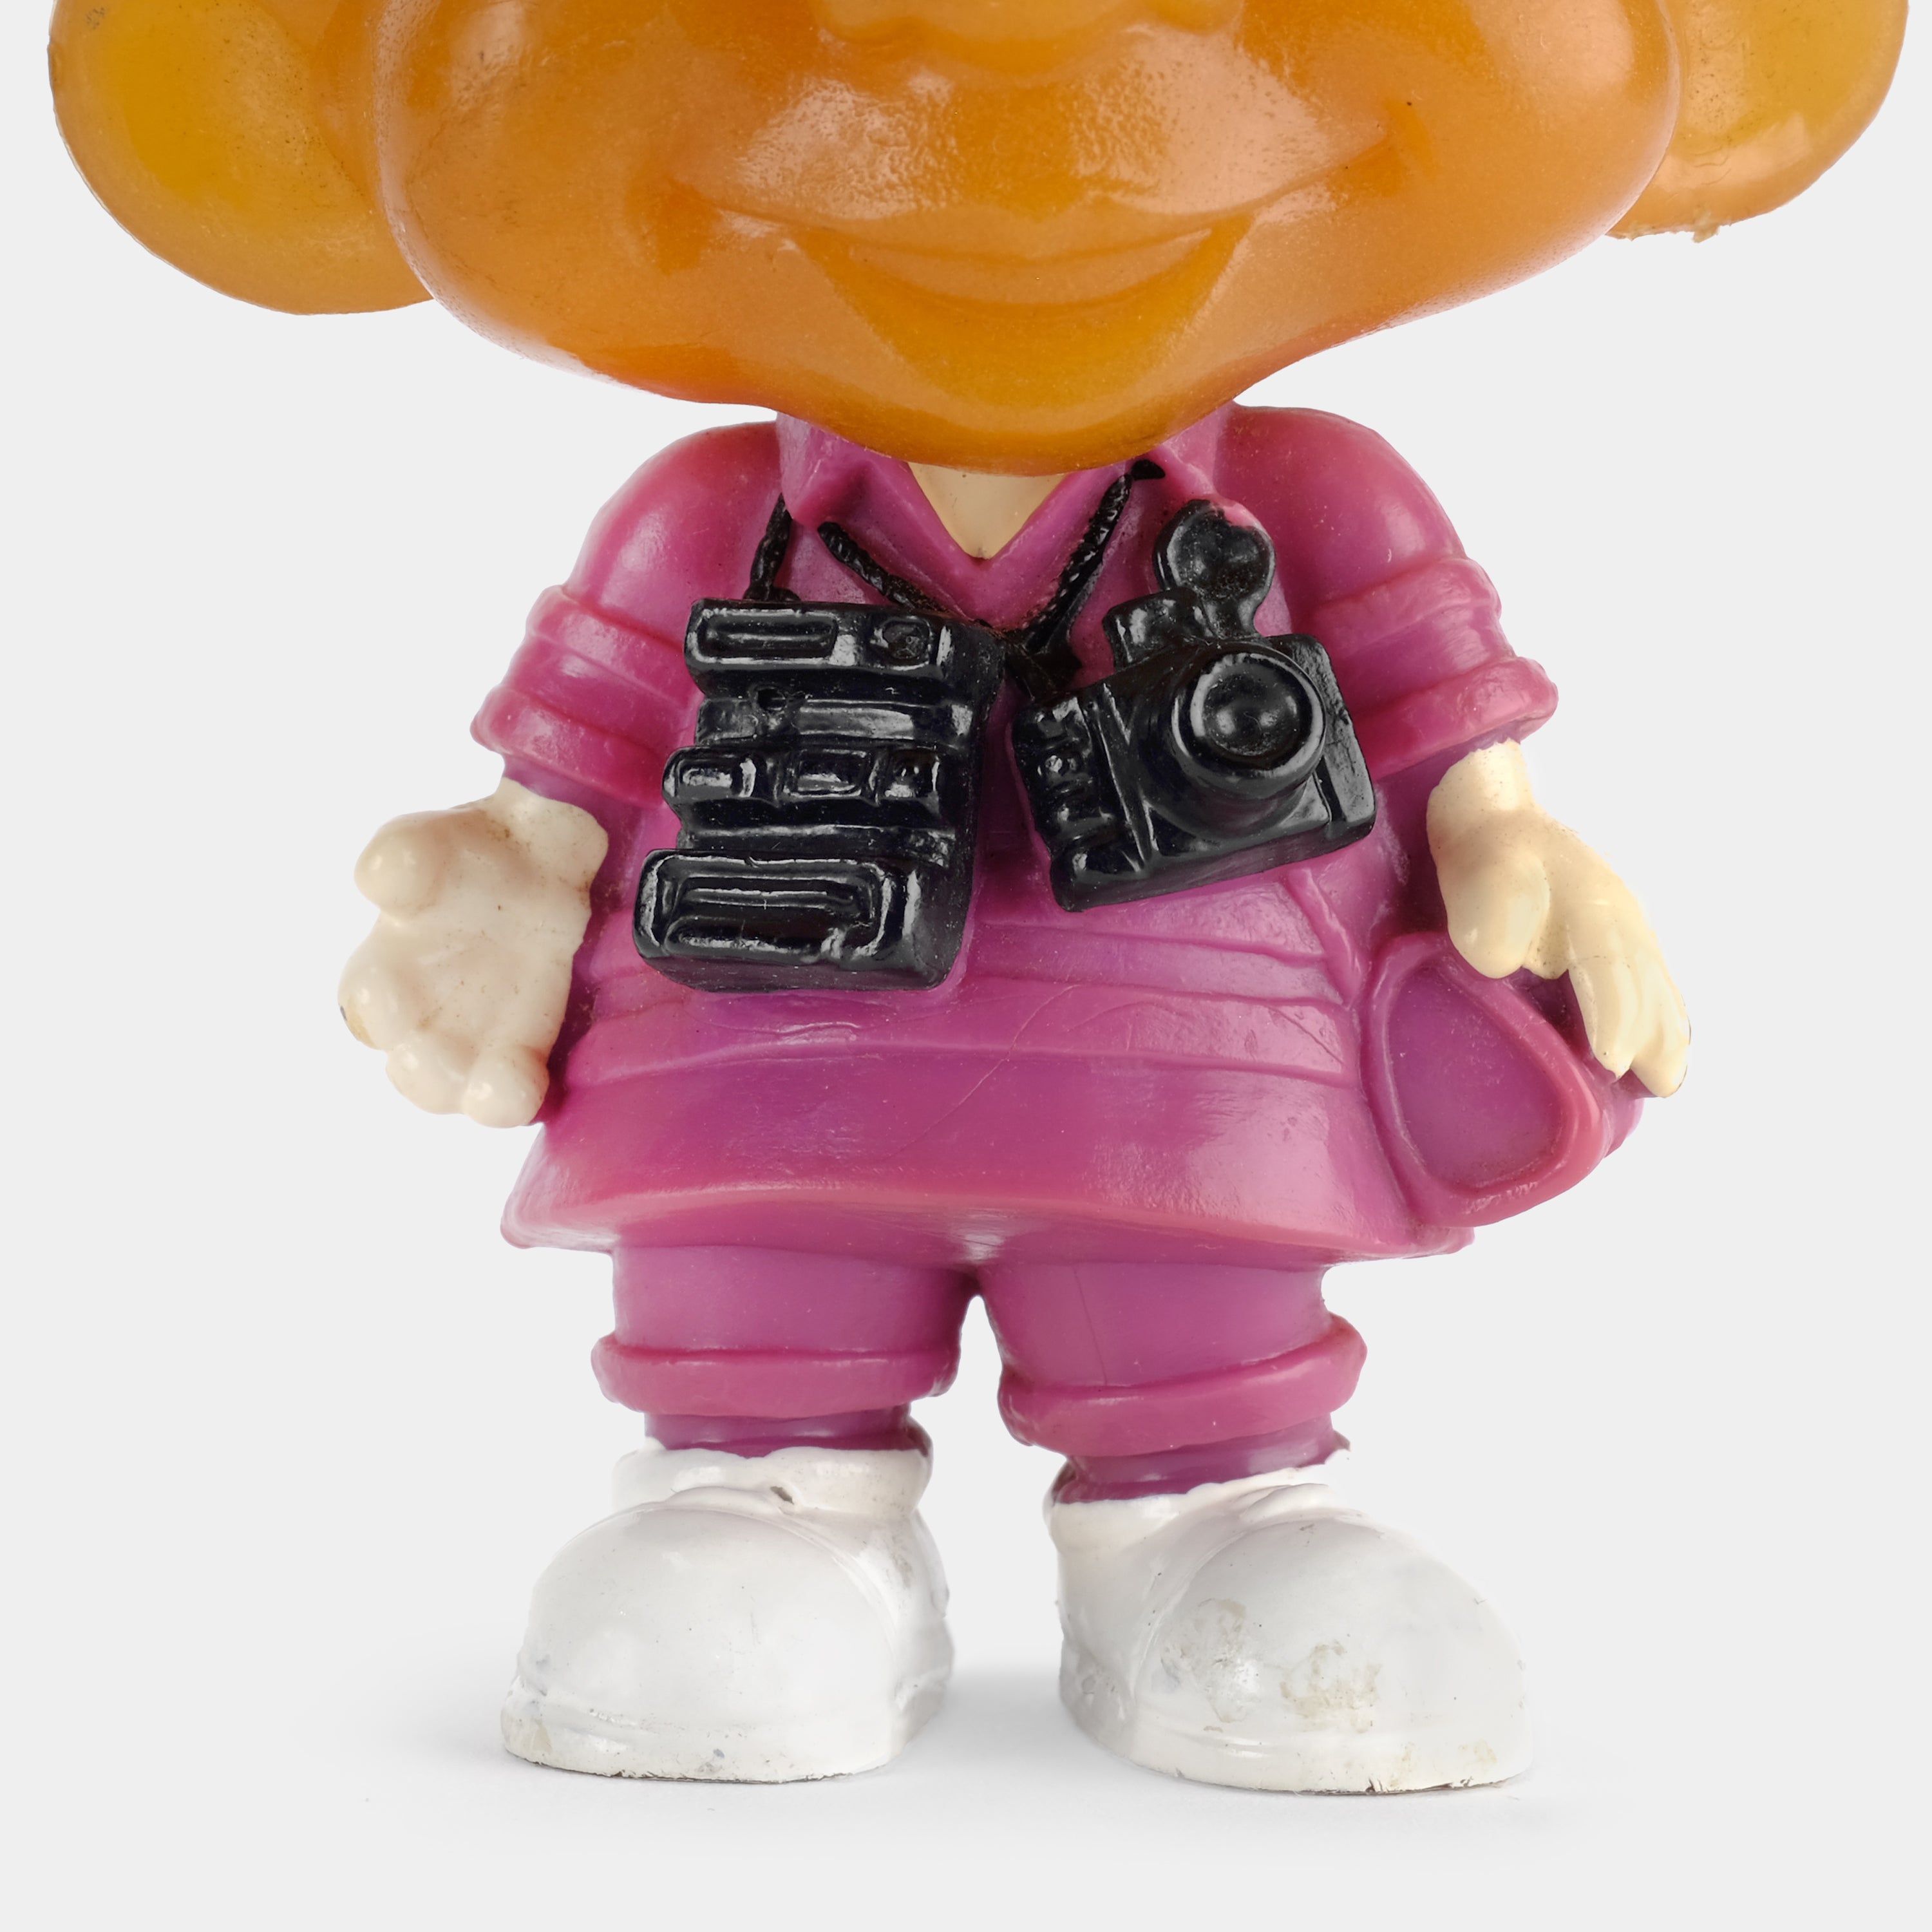 Burger King Kids Club Snaps Troll Doll With Cameras Toy Figurine